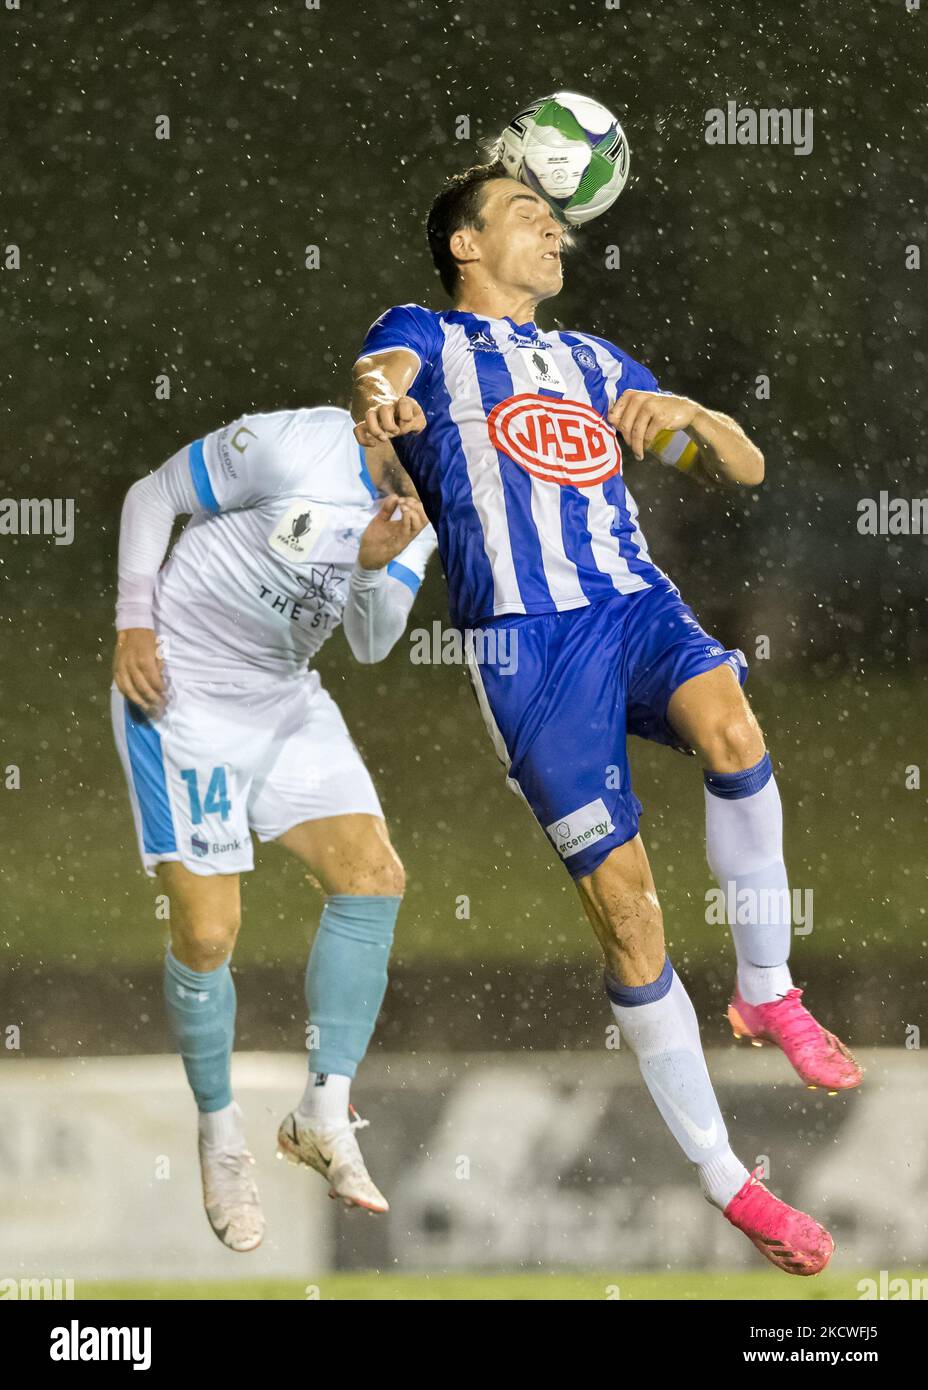 Alex Willson of Olympic FC headers the ball during the FFA Cup round of 32 match between Sydney Olympic FC and Sydney FC at Belmore Sports Ground on November 24, 2021 in Sydney, Australia. (Editorial use only) Stock Photo